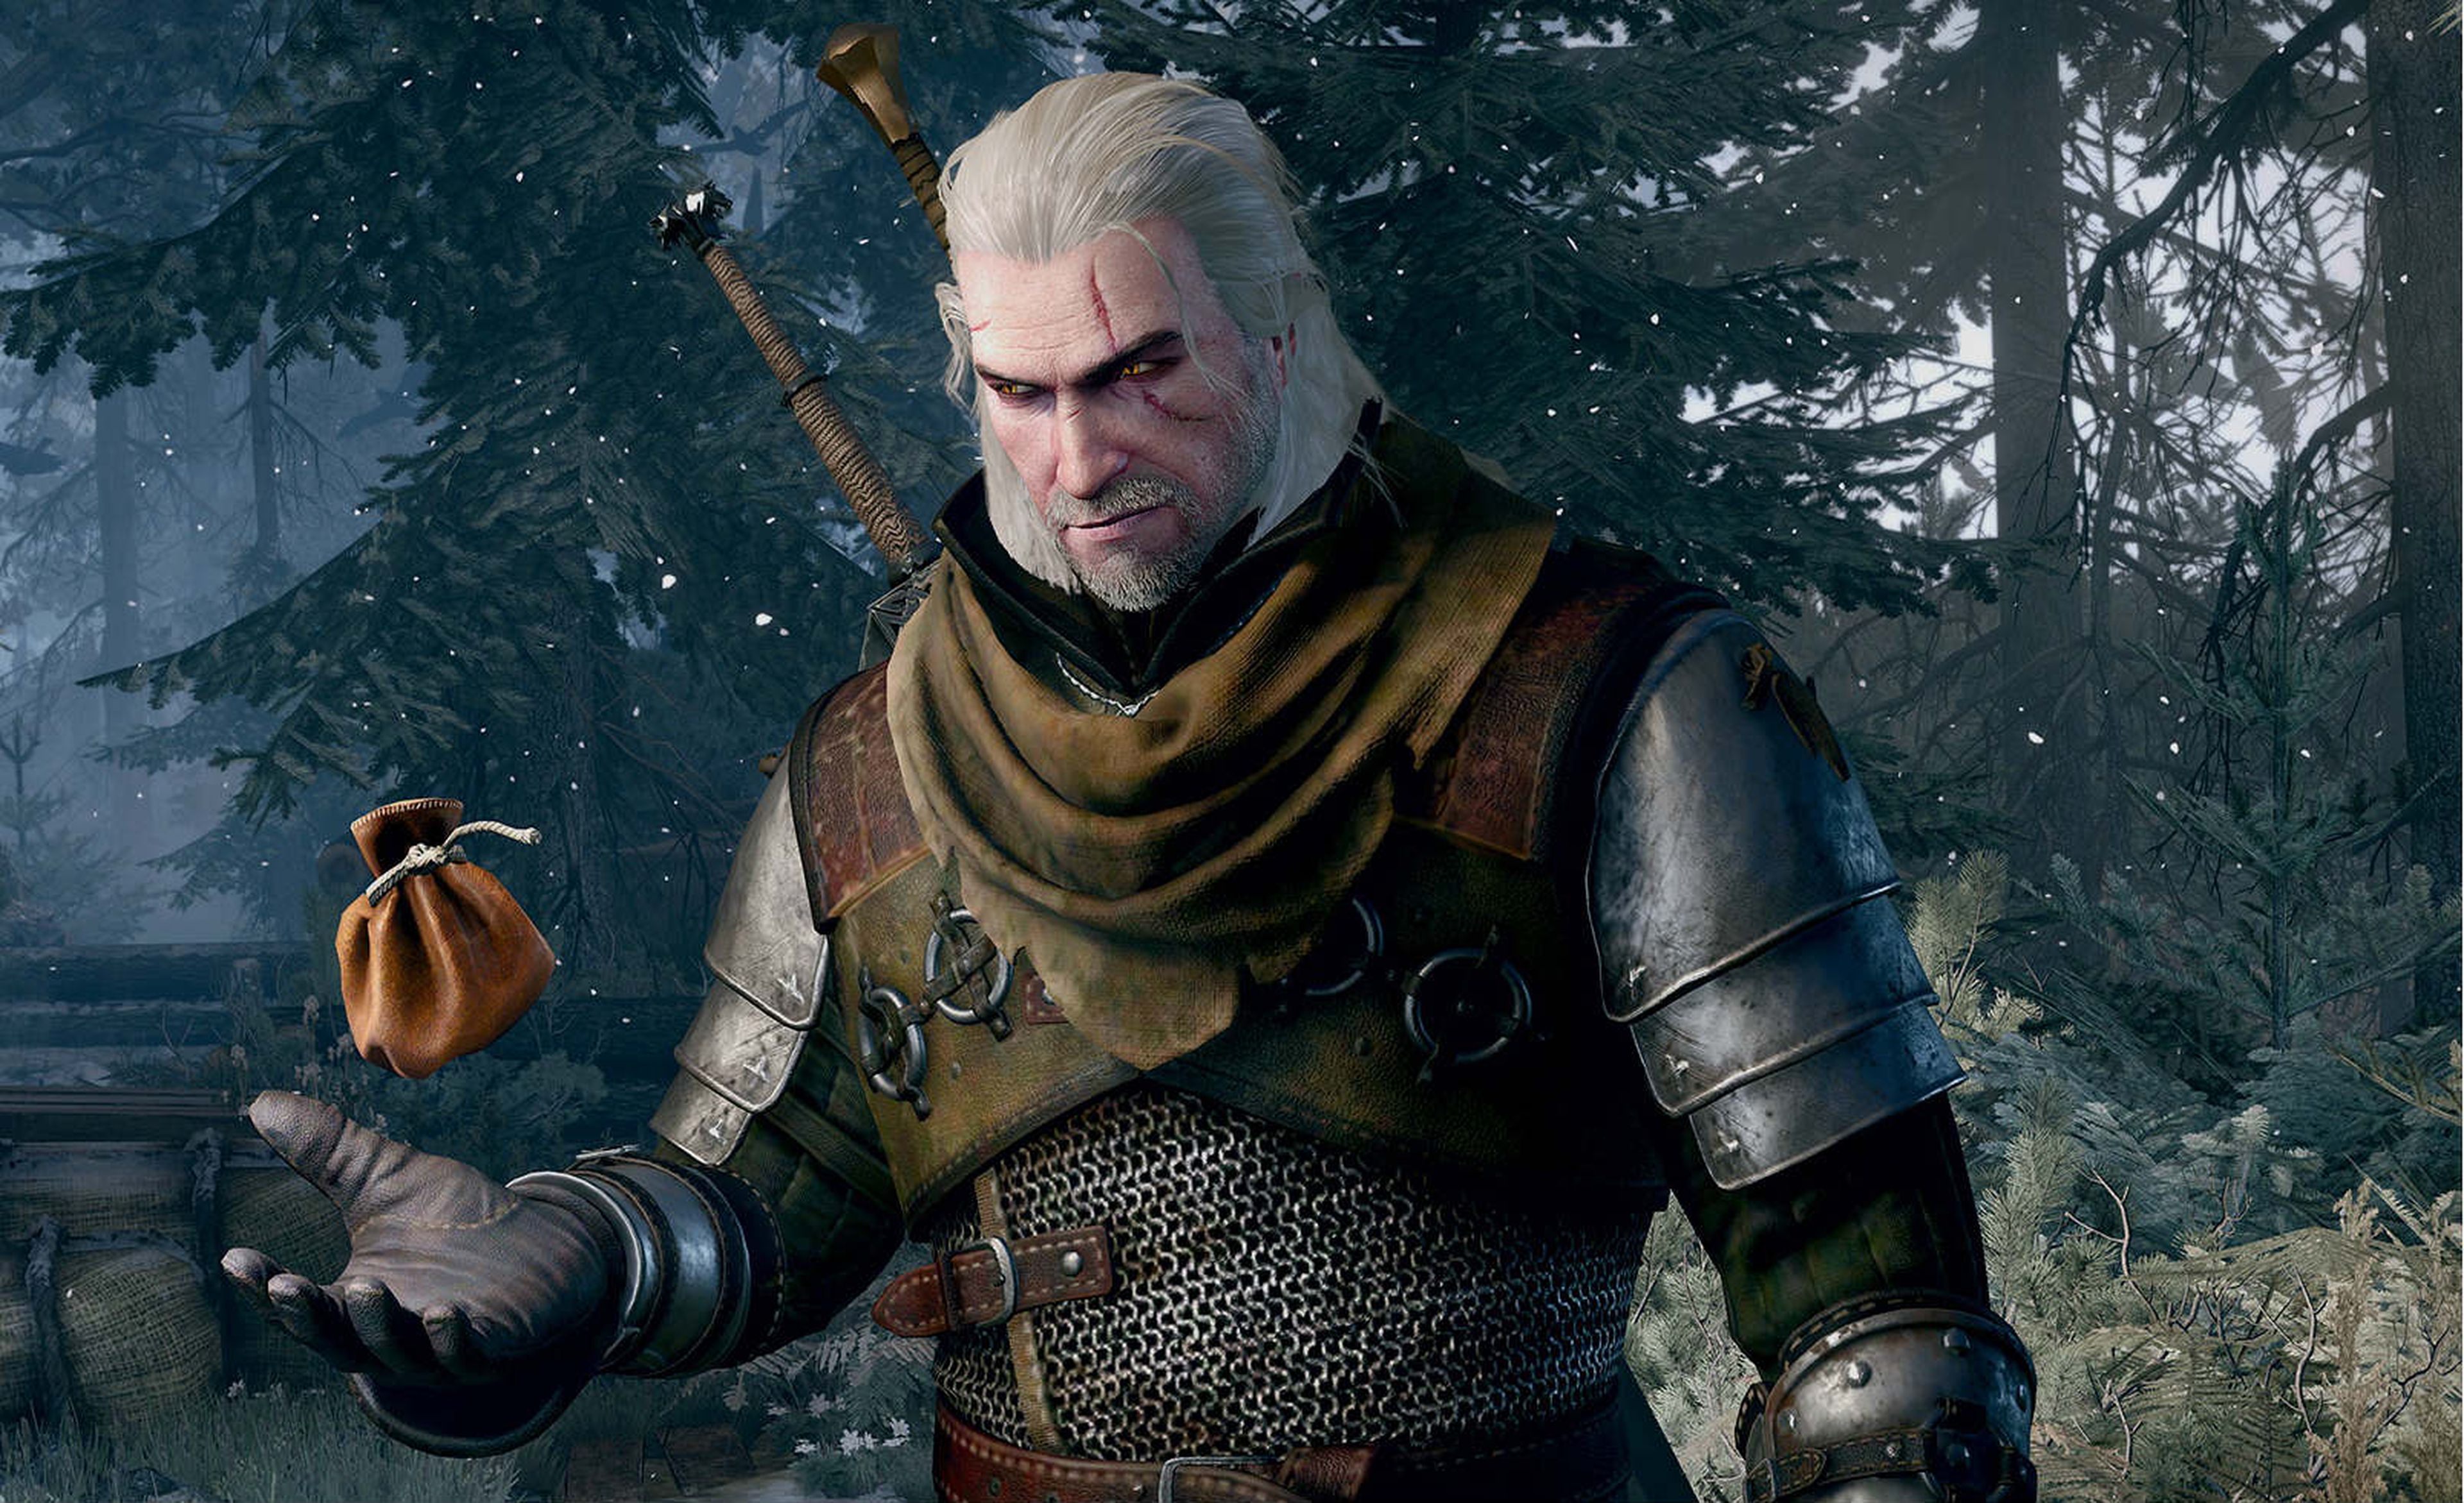 Heart of Stone - Gwynt : cartes - Soluce de The Witcher 3 Wild Hunt 